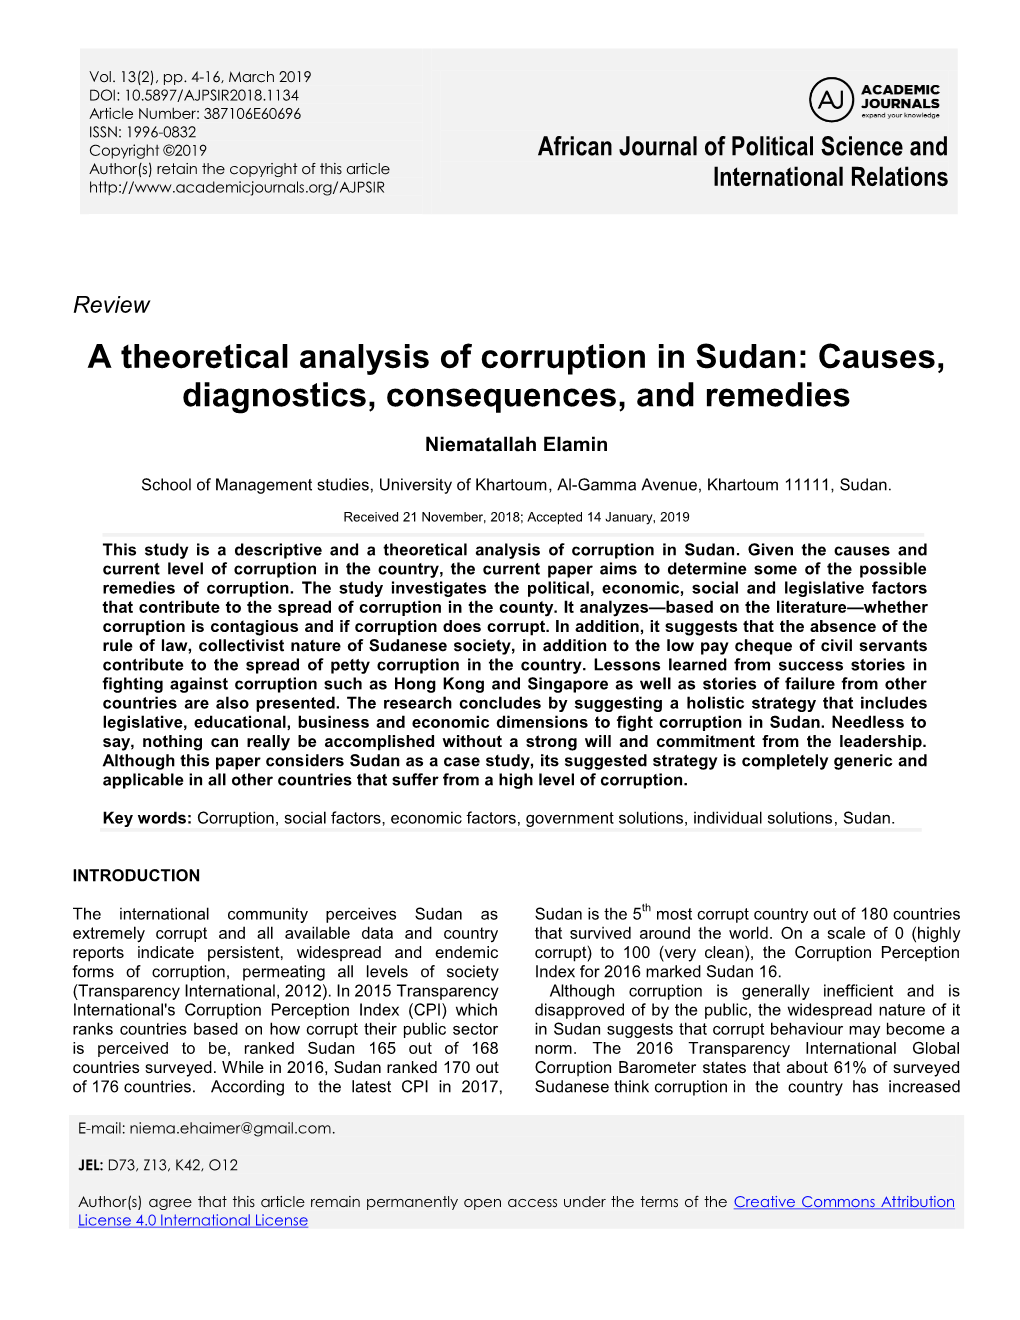 A Theoretical Analysis of Corruption in Sudan: Causes, Diagnostics, Consequences, and Remedies